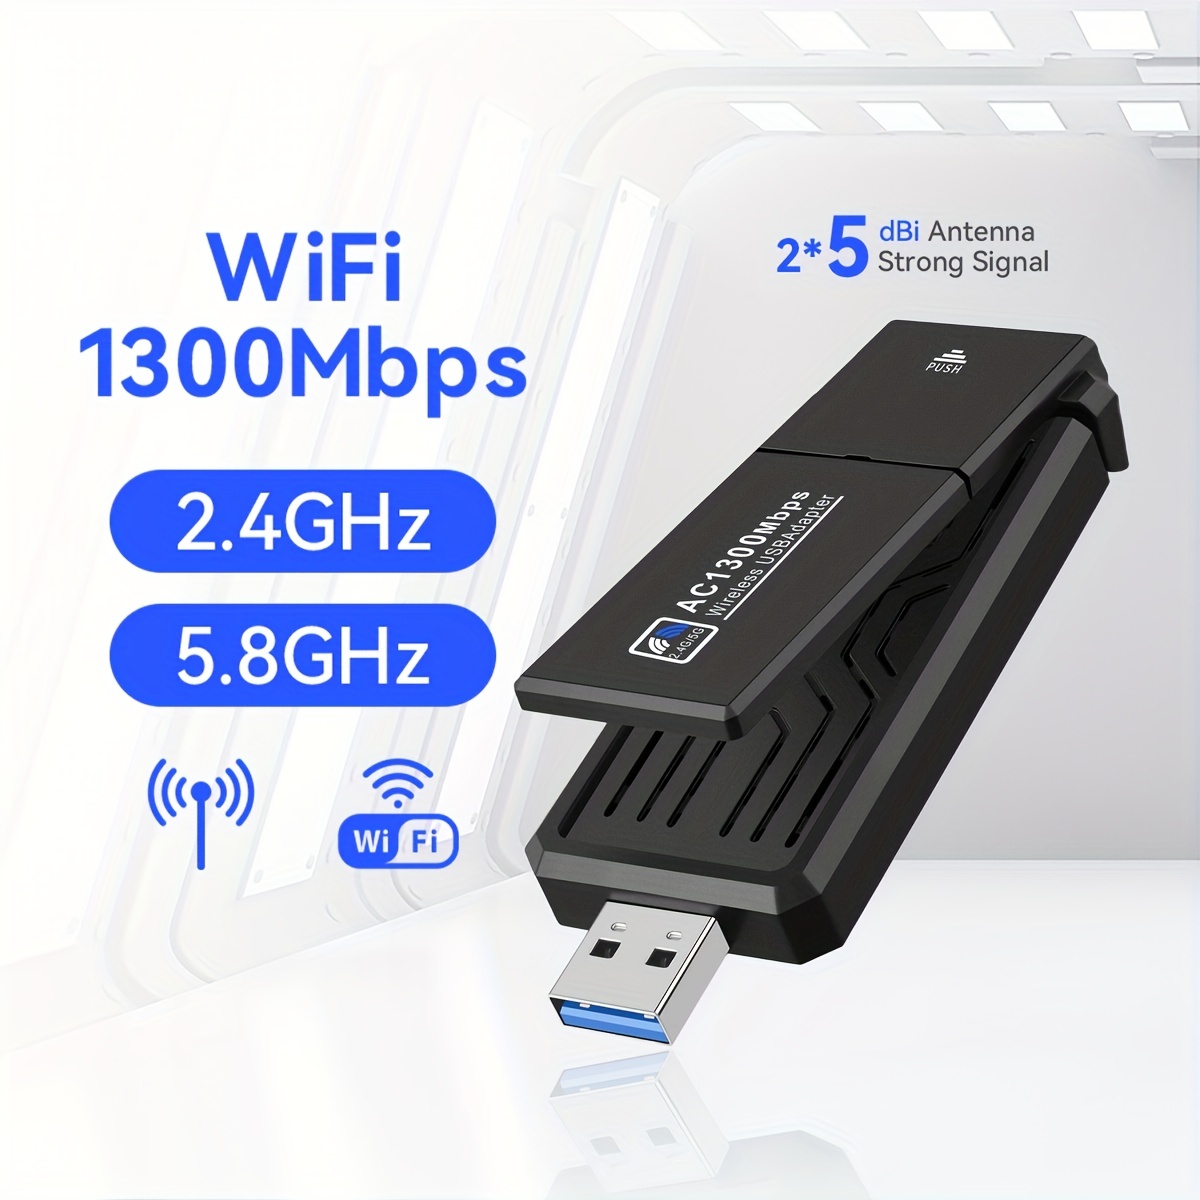  WiFi 6E USB 3.0 WiFi Adapter for PC, AX5400M 802.11AX, Tri-Band  6GHz/5GHz/2.4GHz, Dual 5dBi Antennas, EDUP Wireless USB WiFi Dongle Network  Adapter for PC Laptop, Only Compatible with Windows 11/10 